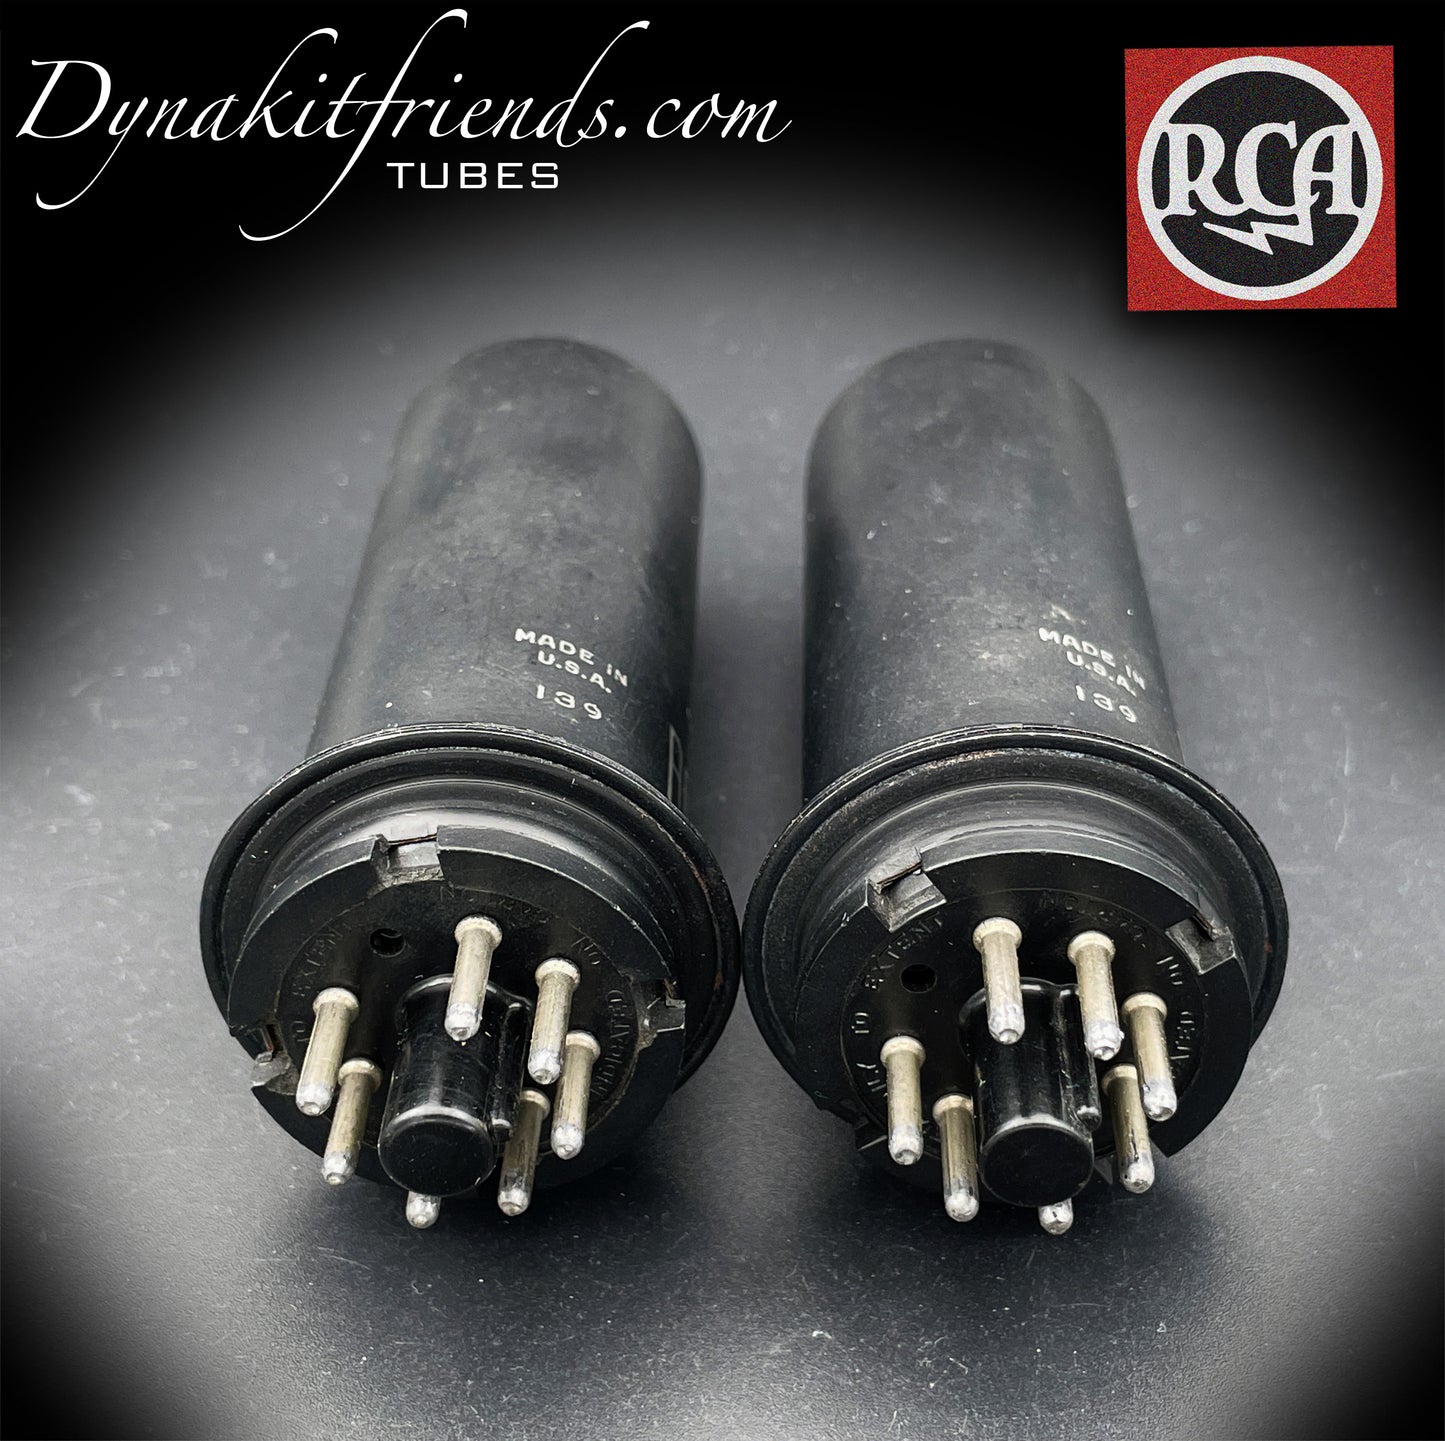 6L6 RCA NOS Metal Can Matched Pair Tubes Same Data Codes Made in USA in 1951